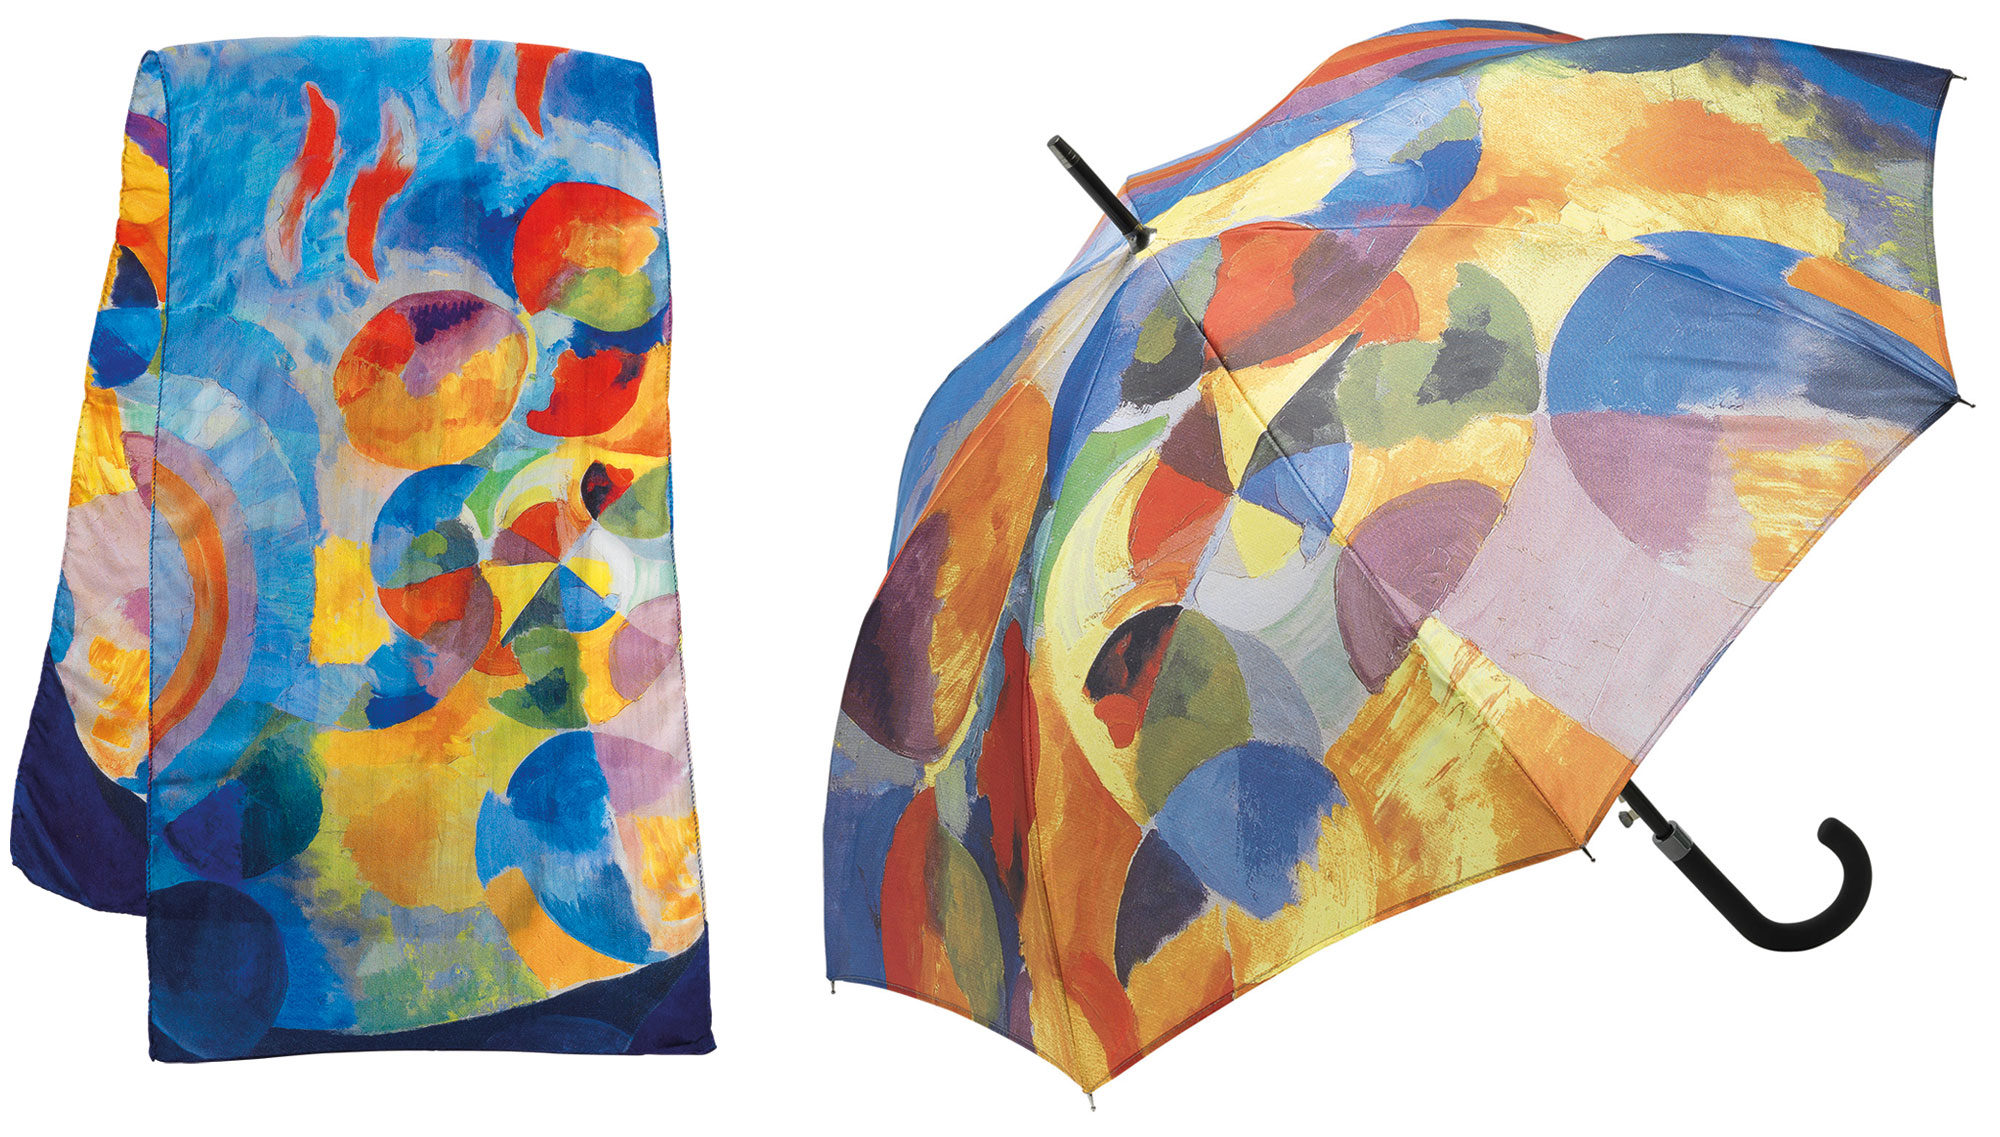 Set of silk scarf and stick umbrella "Formes Circulaires" (1912) by Robert Delaunay